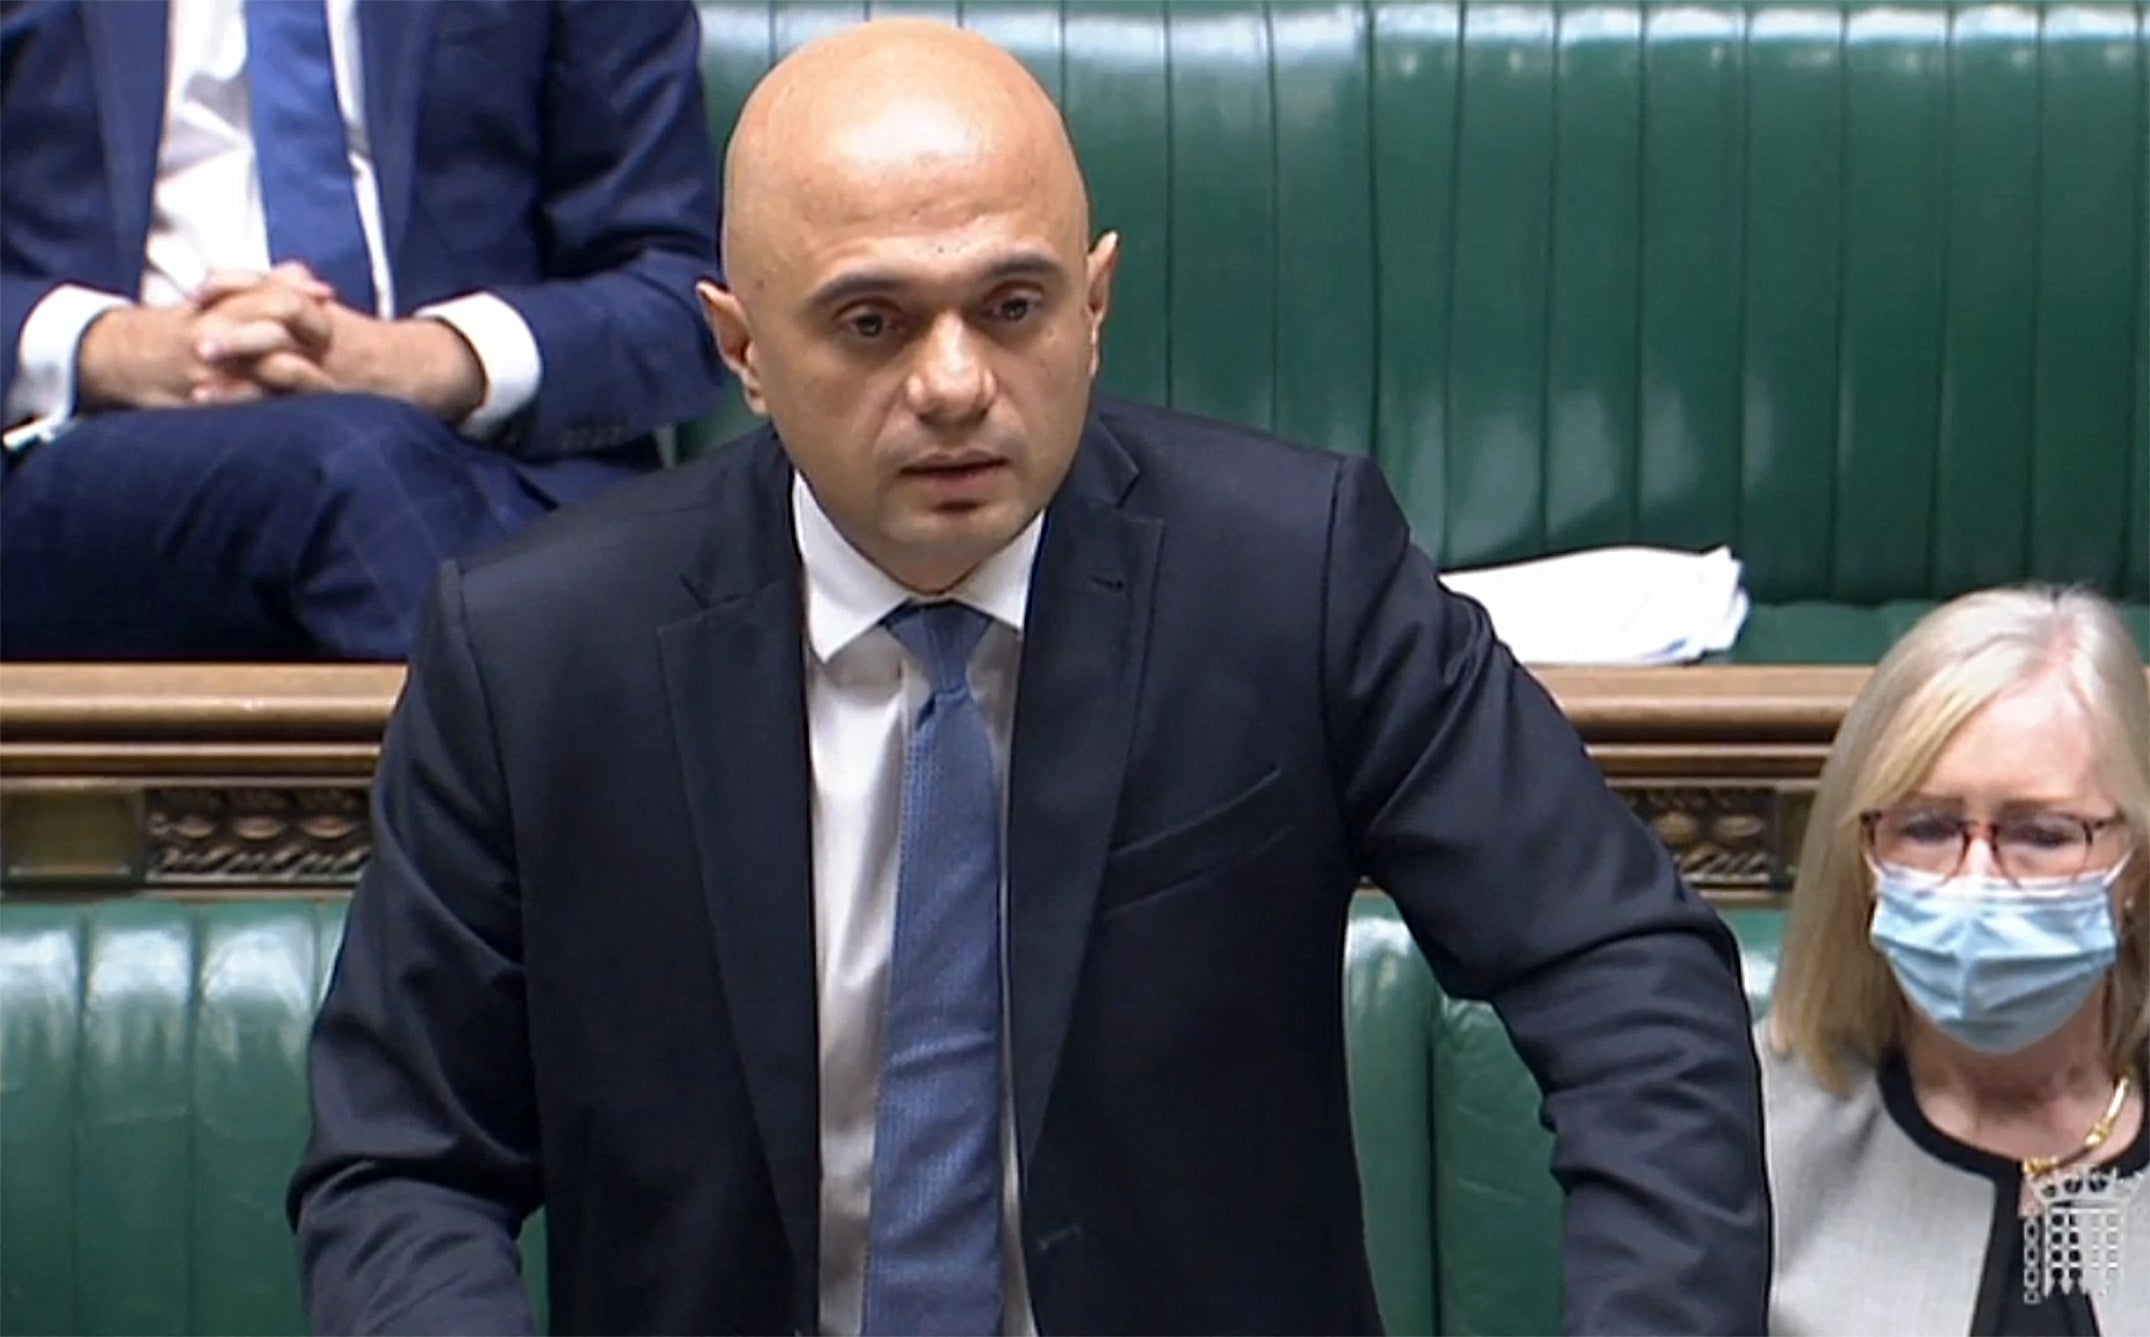 Sajid Javid will need to act swiftly – something that has evaded the government so far